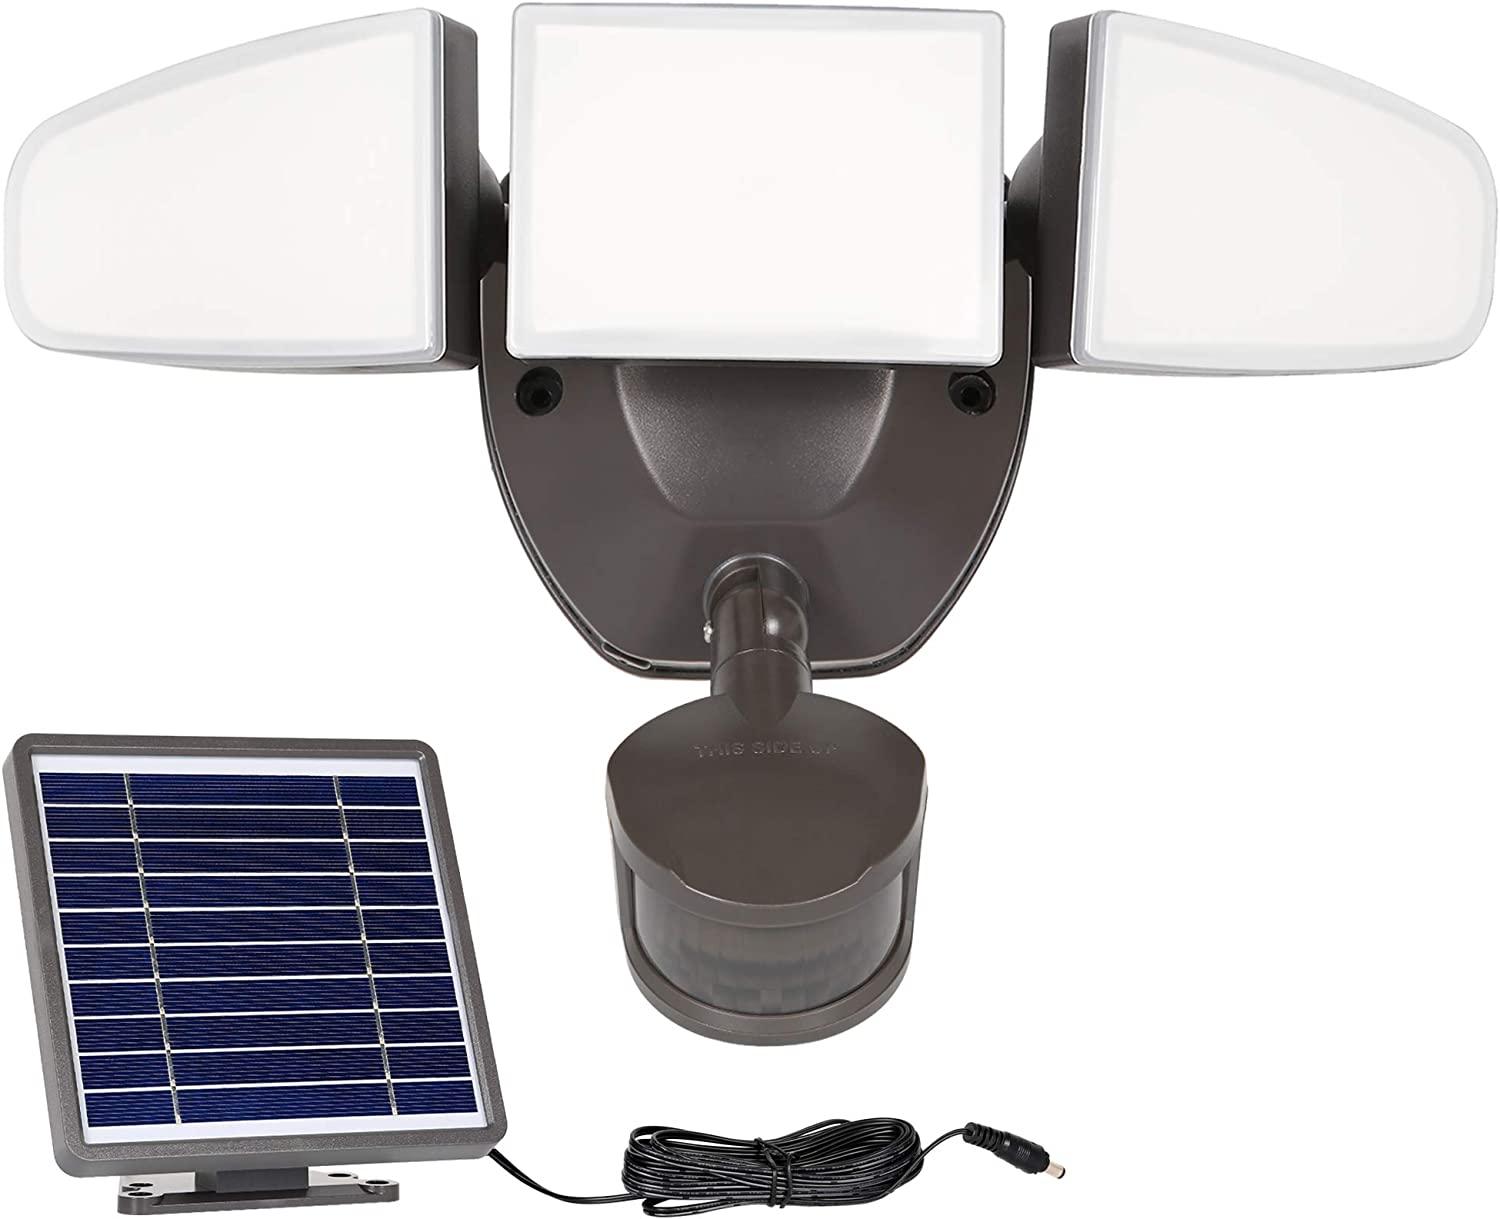 Hykolity 15W 1500LM Solar LED Security Light for $13.99 Shipped